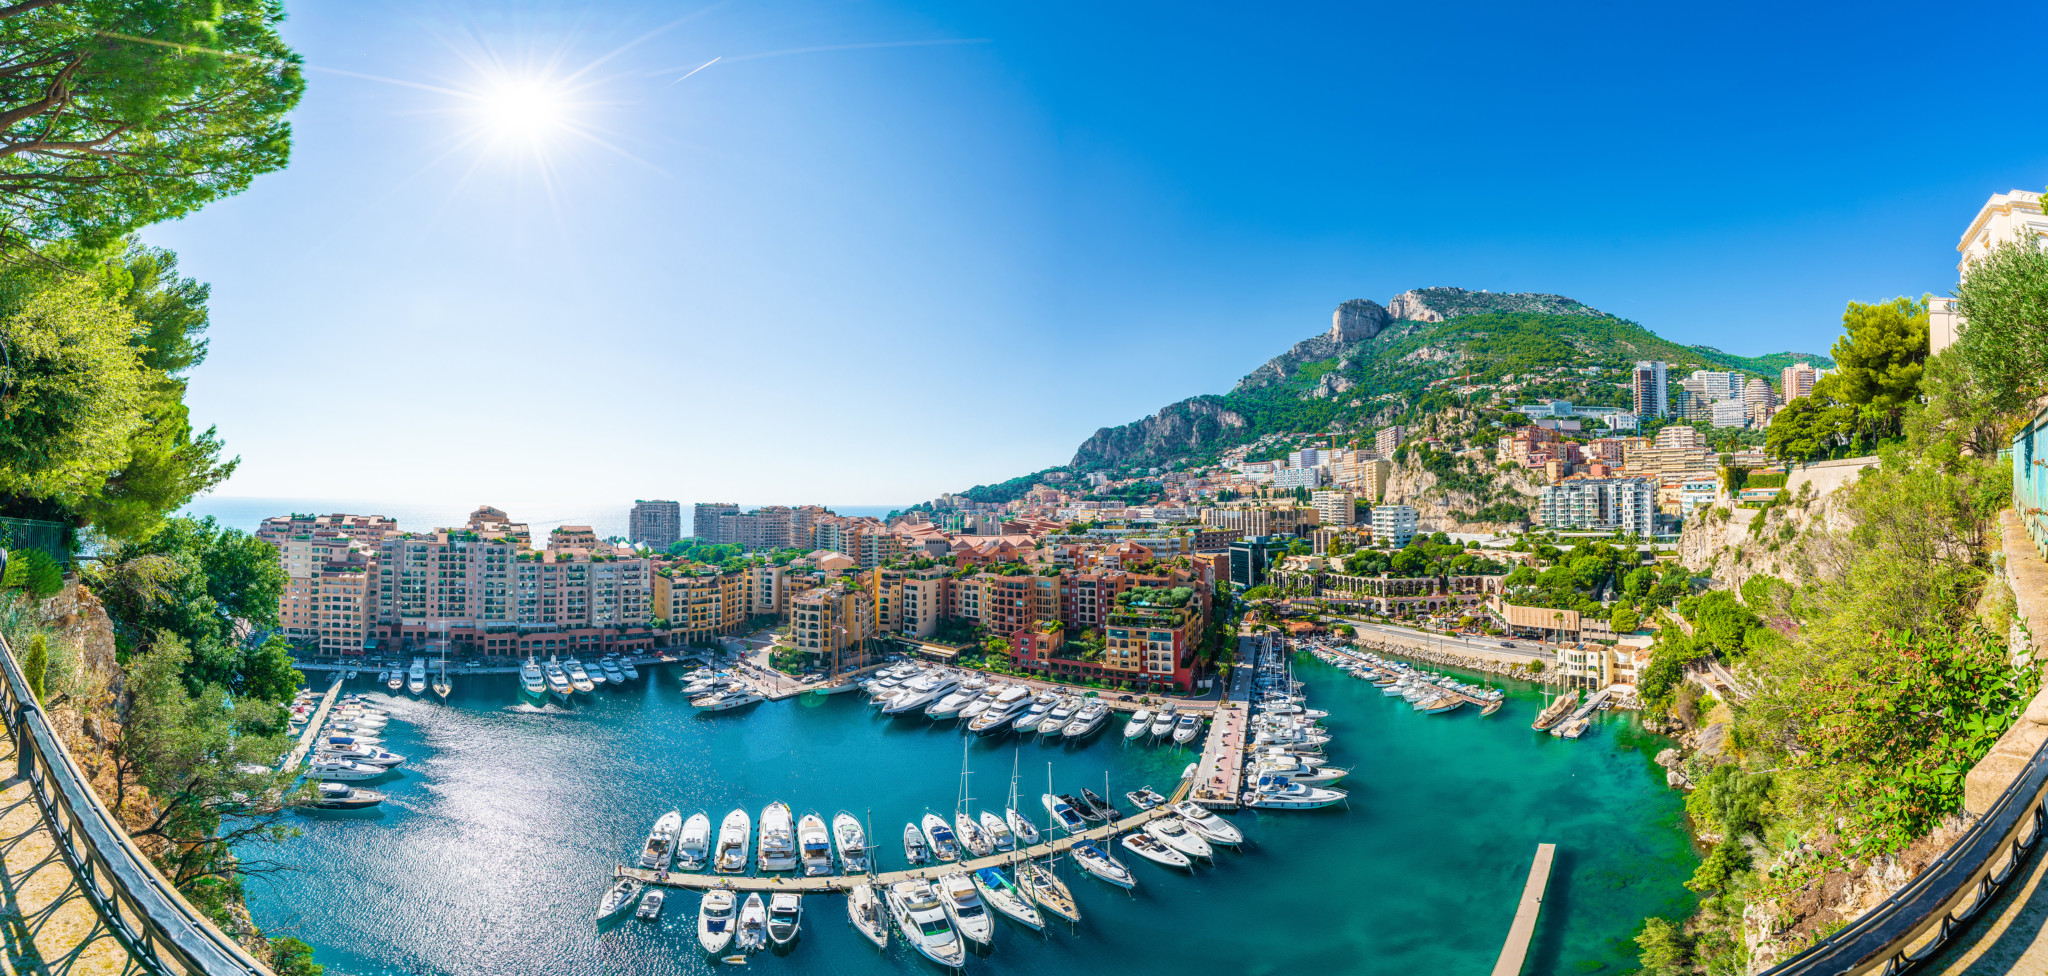 French Riviera - The Best Luxury Yacht Destinations for 2023-2024